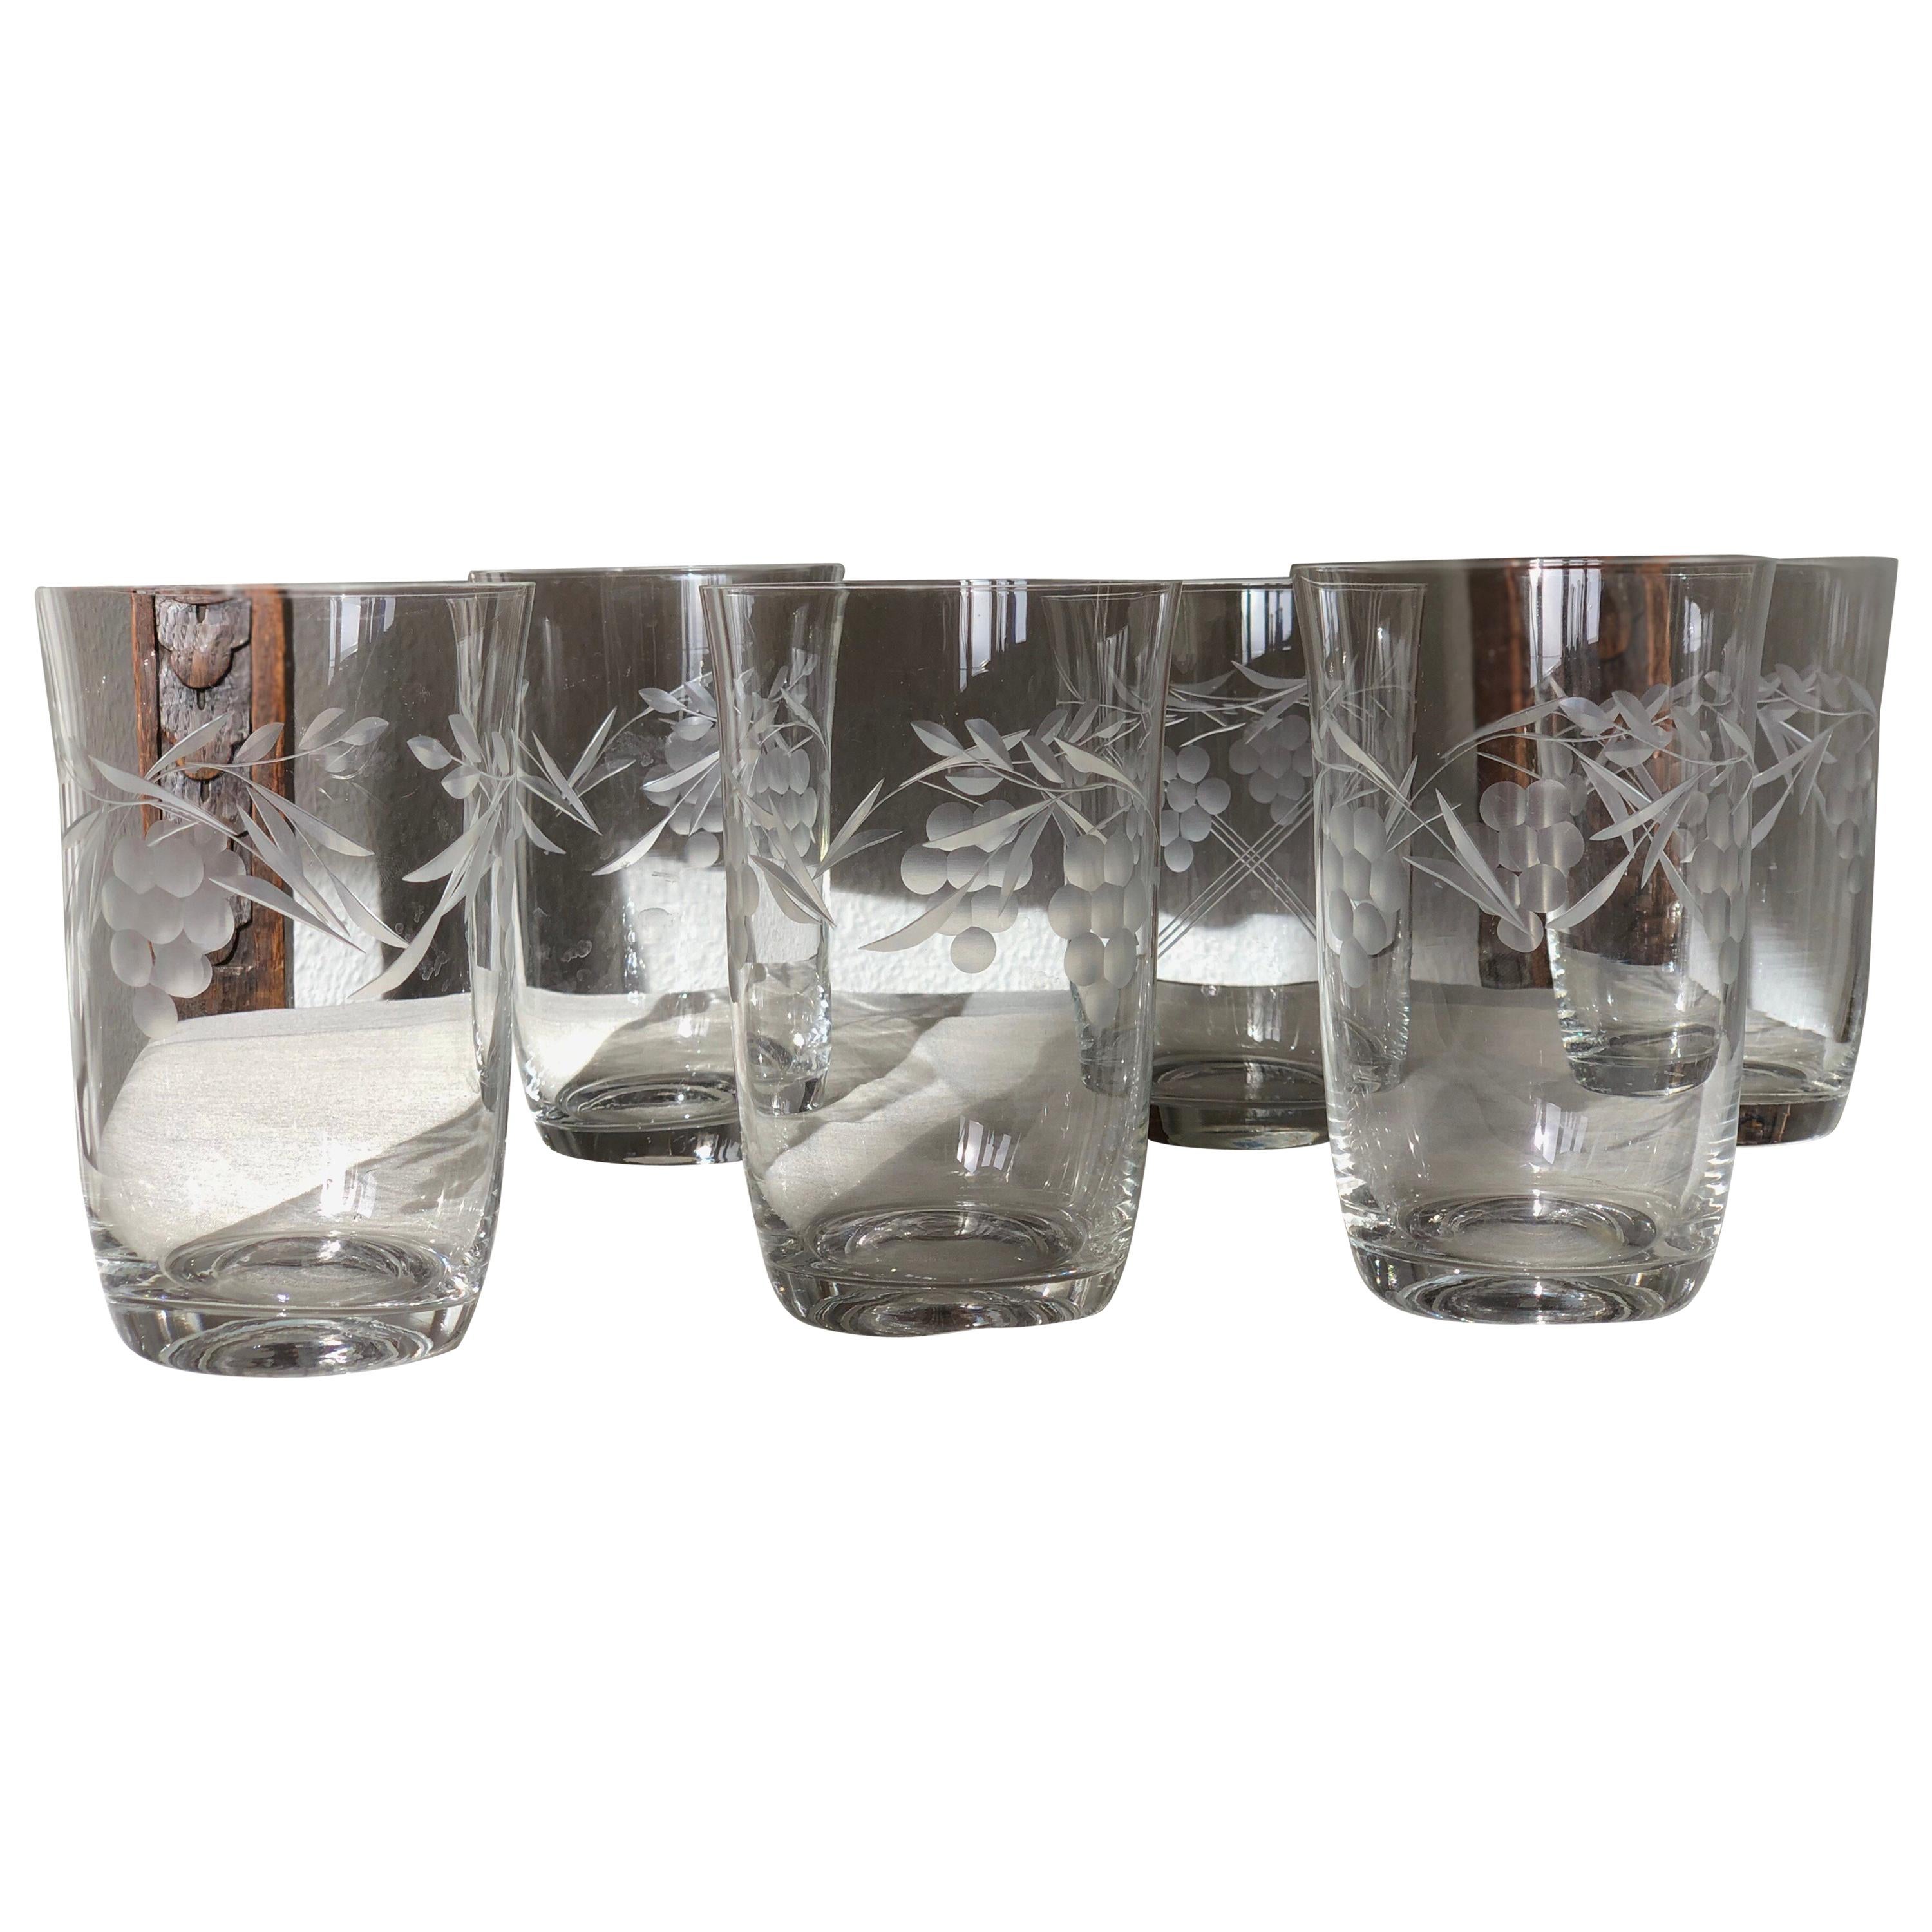 Six Stunning Engraved Grape Victorian Etched Tumbler or Goblets SALE 